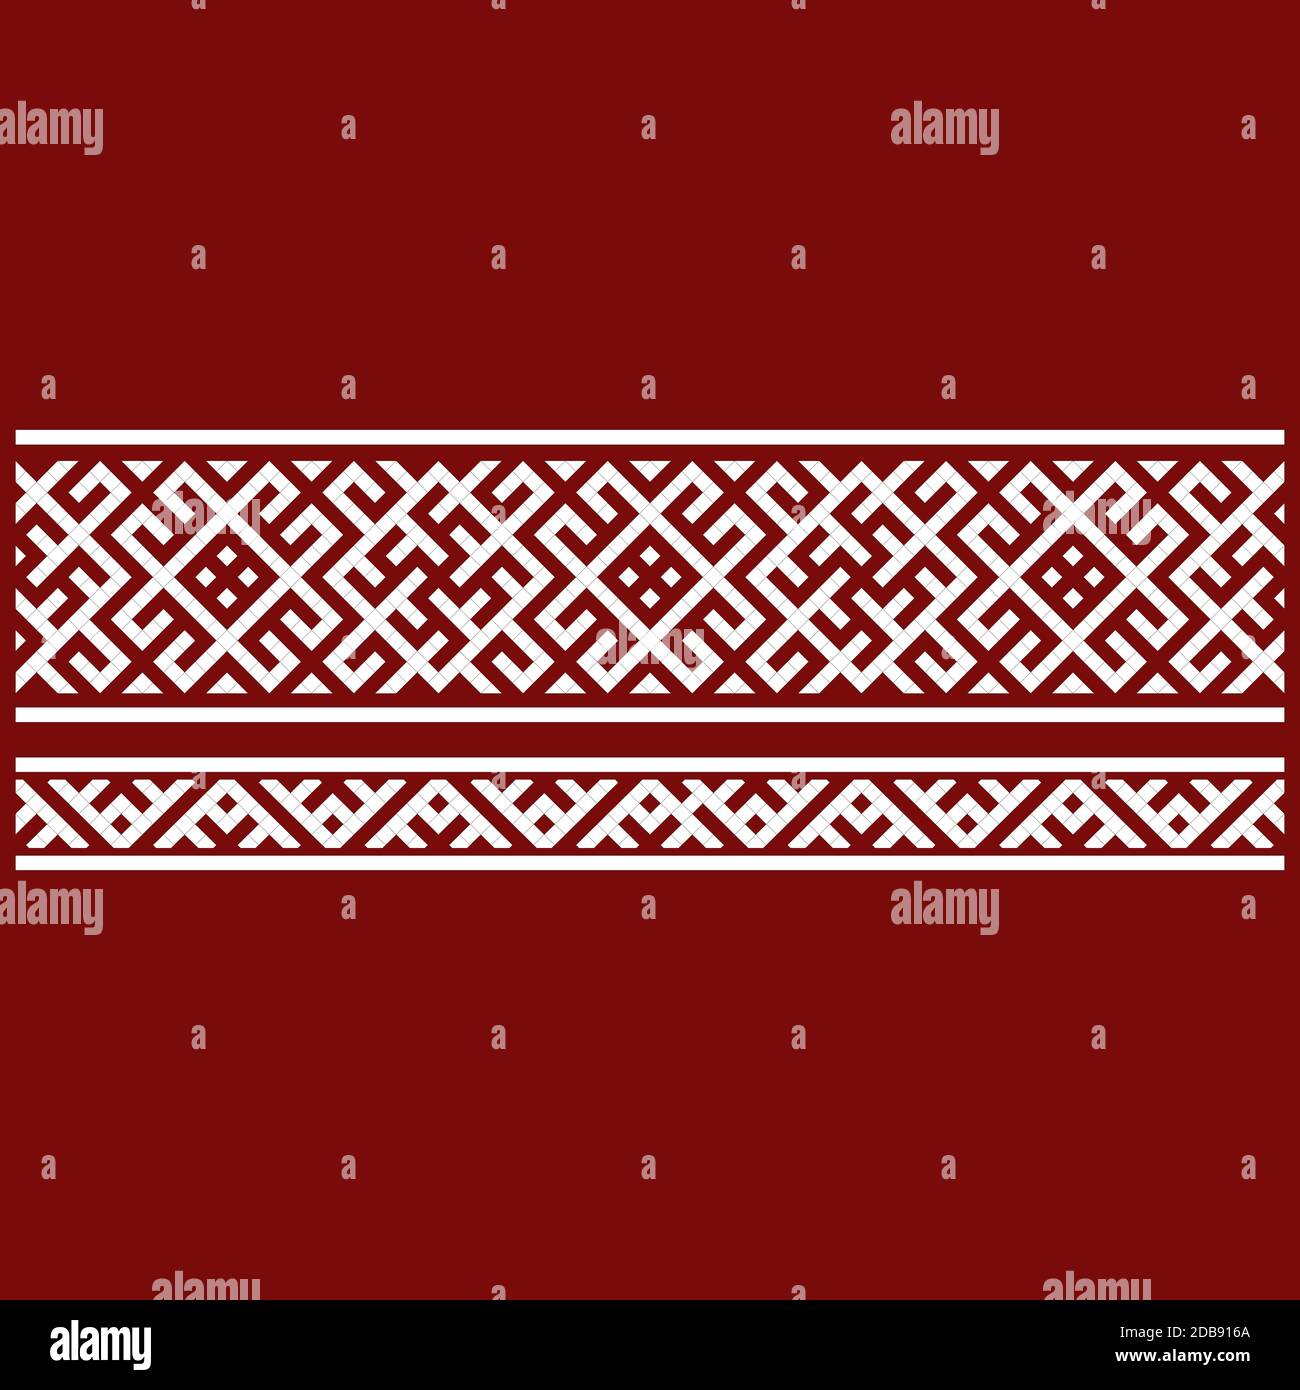 Traditional embroidery. Vector illustration of ethnic seamless ornamental geometric patterns for your design. Stock Photo